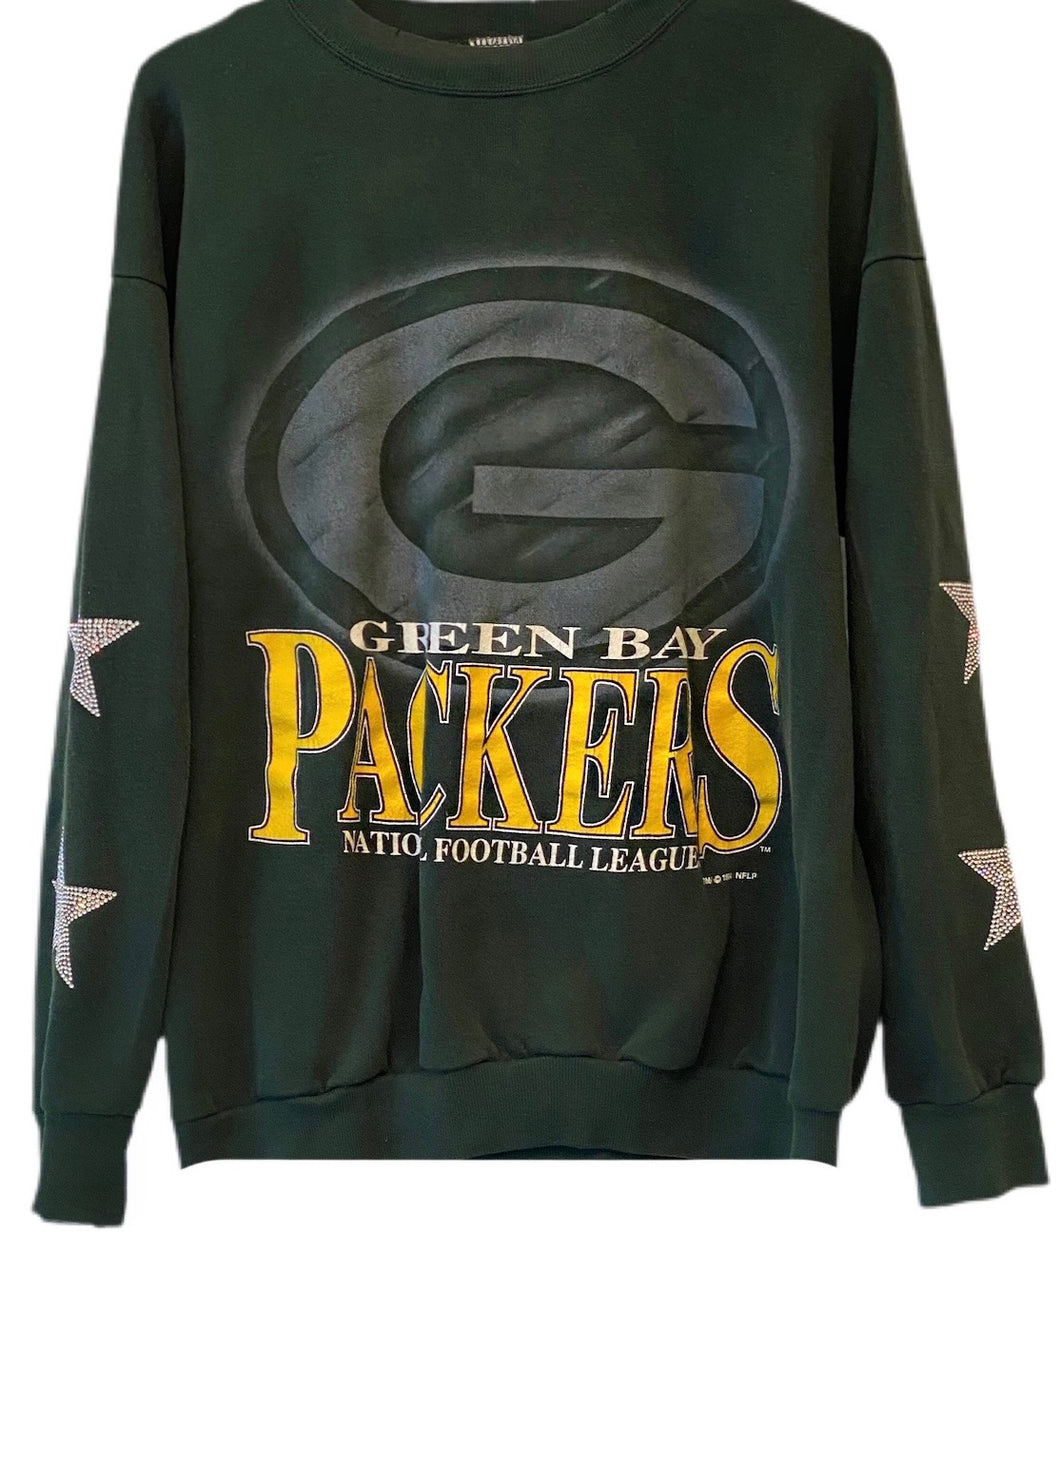 Green Bay Packers, NFL One of a KIND Vintage 1994 Sweatshirt with Crystal Star Design